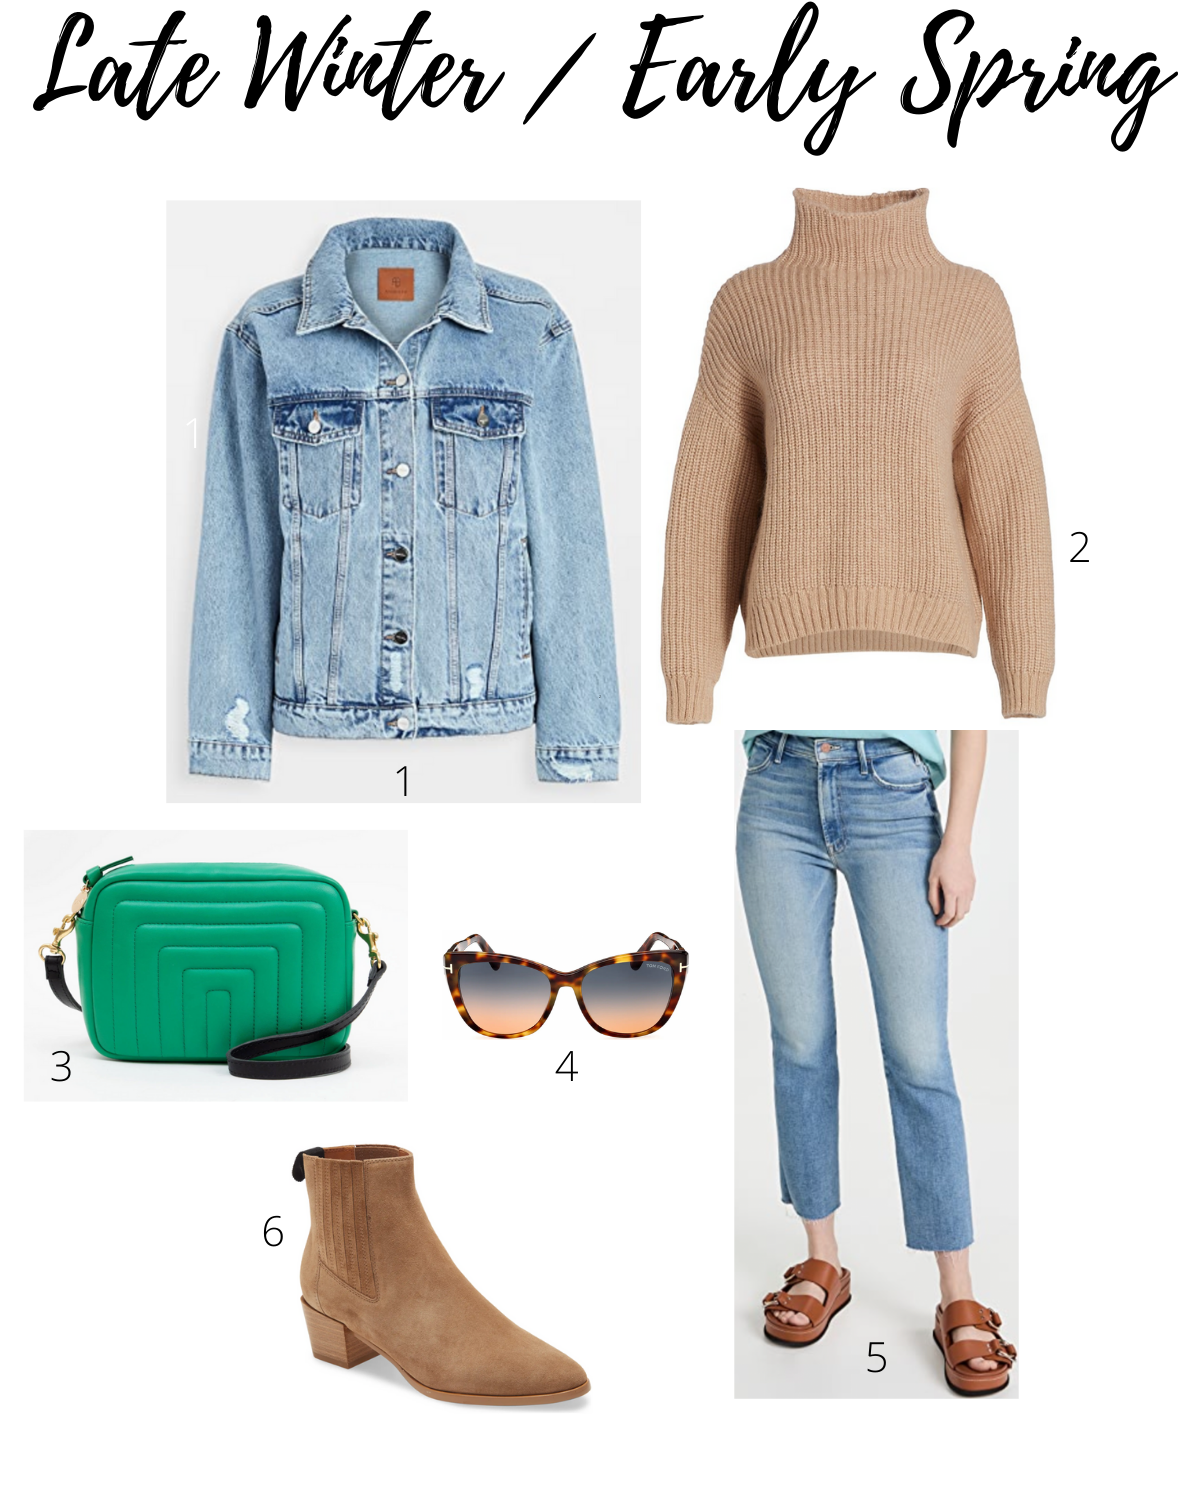 Is double denim in fashion - a late winter / early spring look.